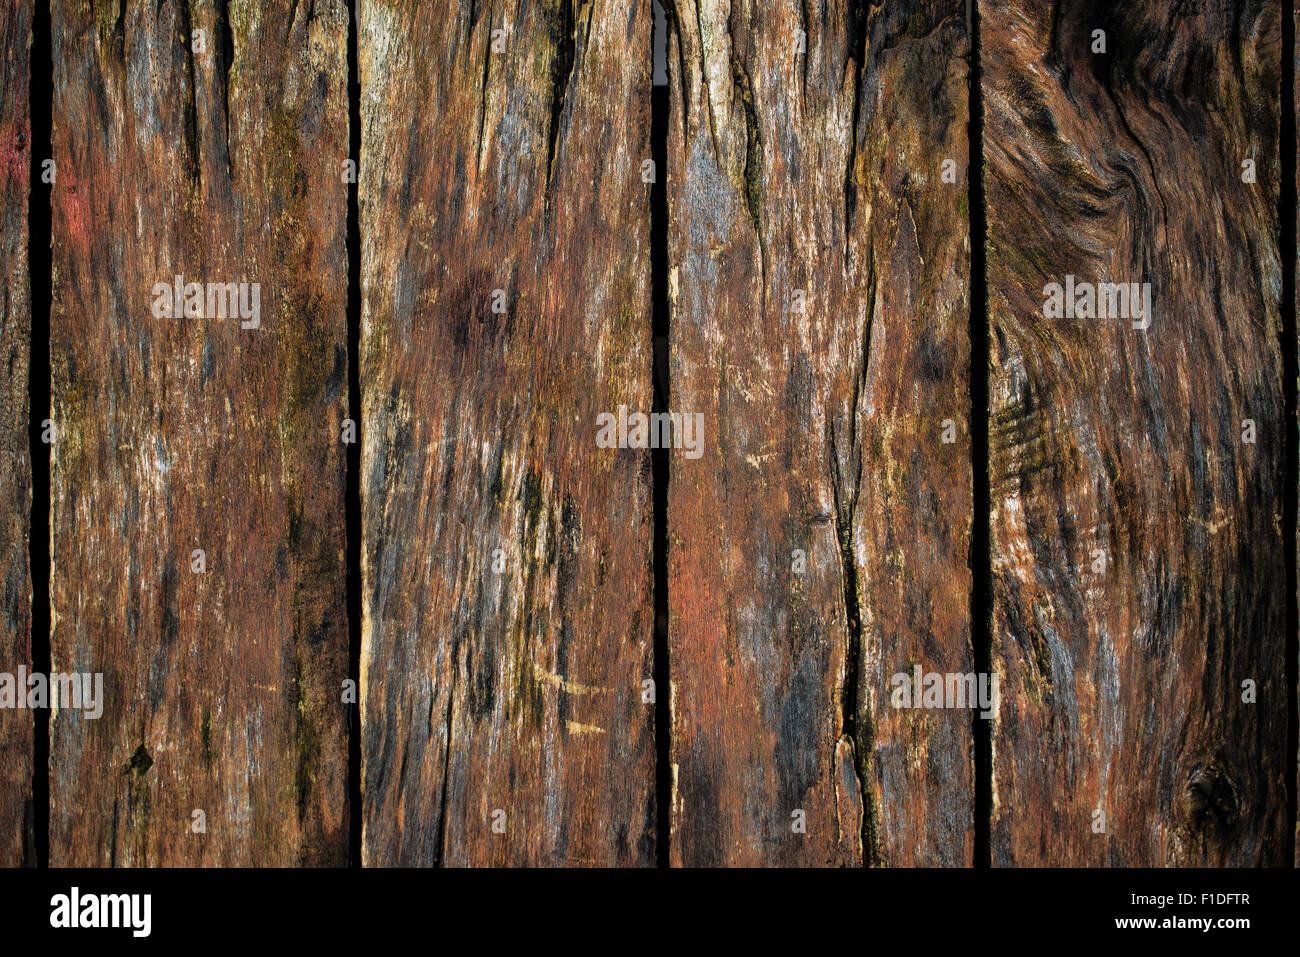 Rustic wood surface texture, old wooden planks as background Stock Photo